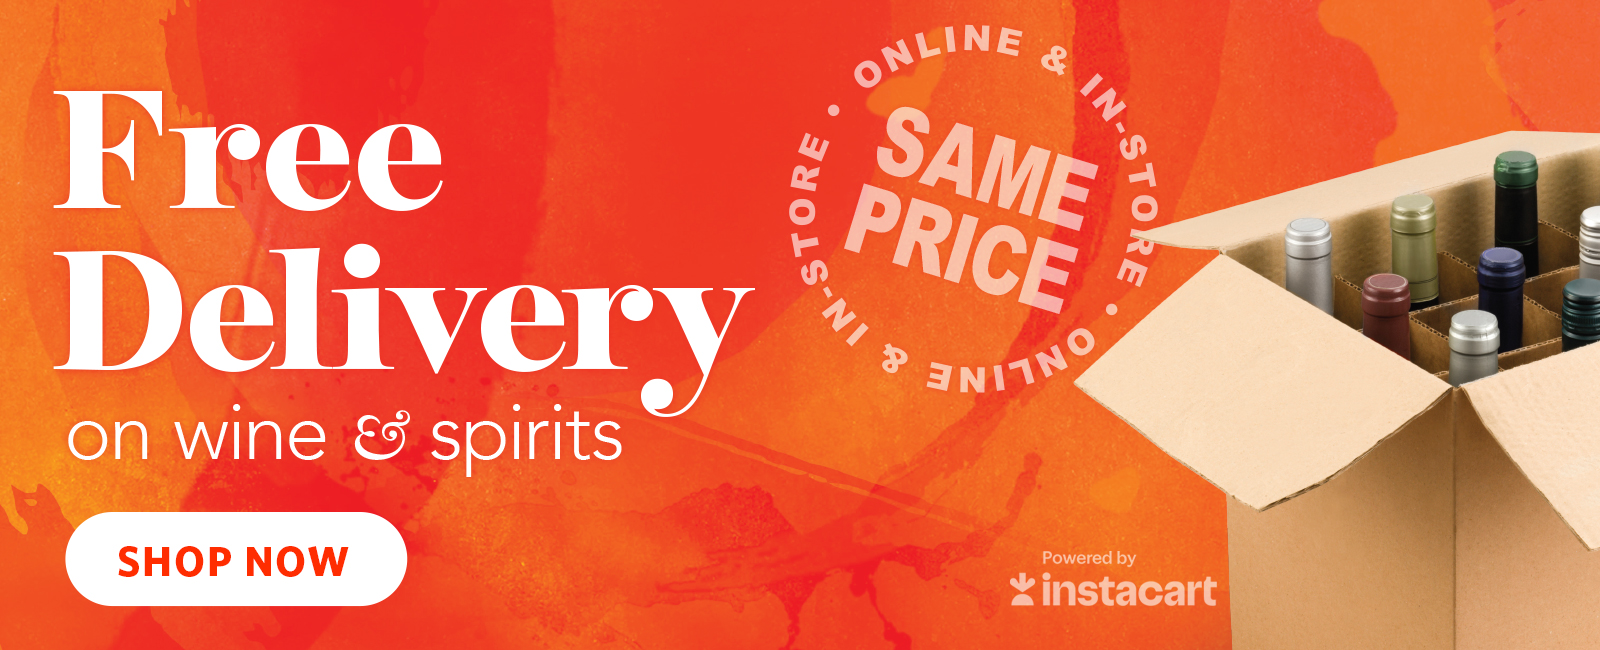 Free Delivery on Wine & Spirits - SHOP NOW